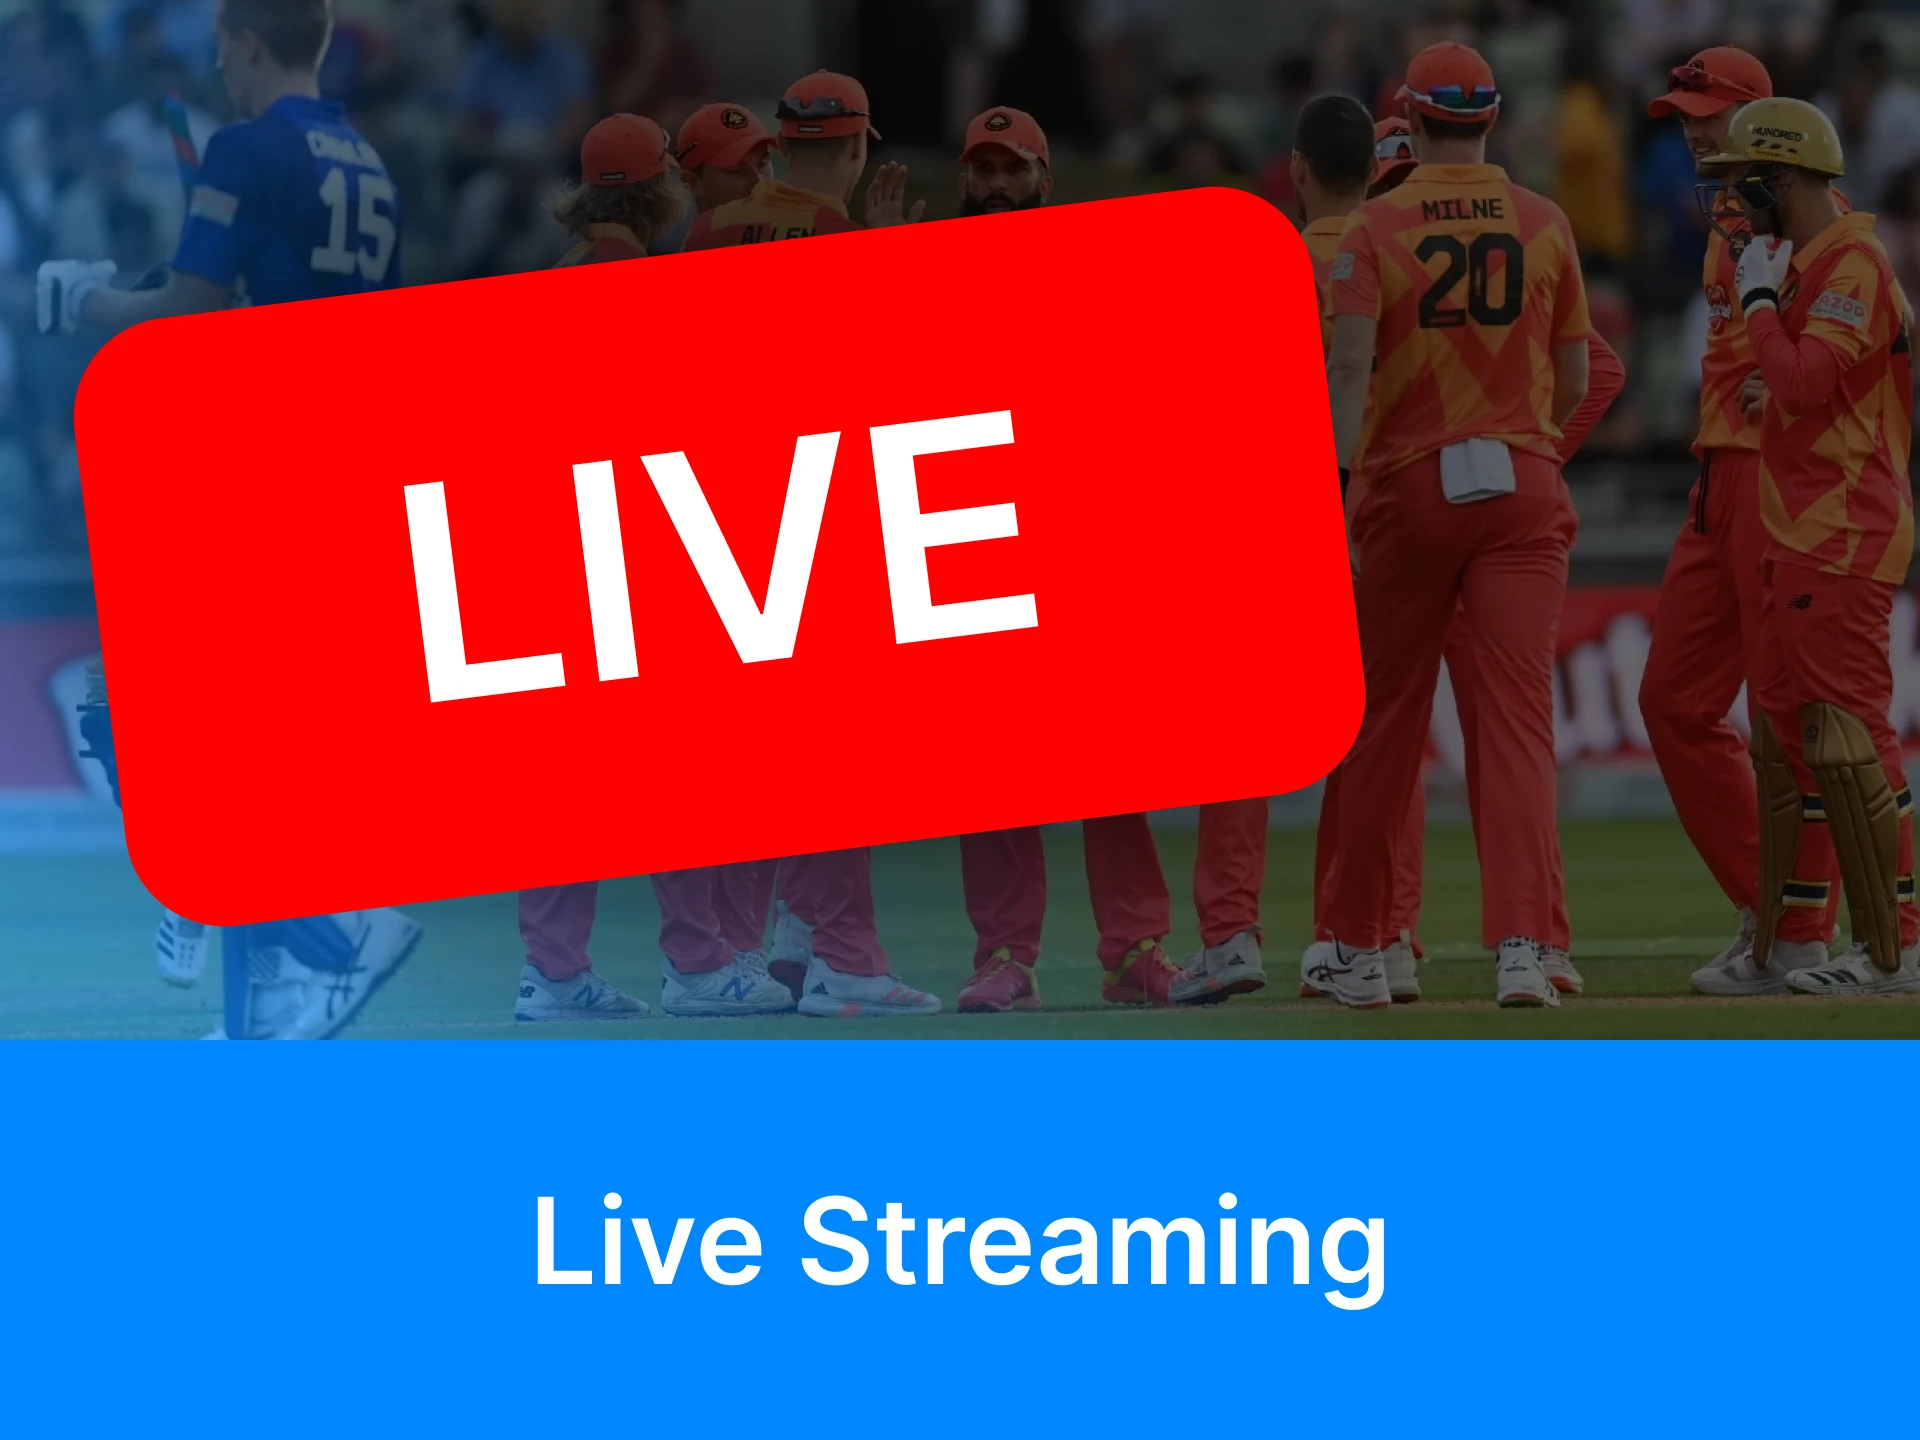 Watch The Hundred games in live format.